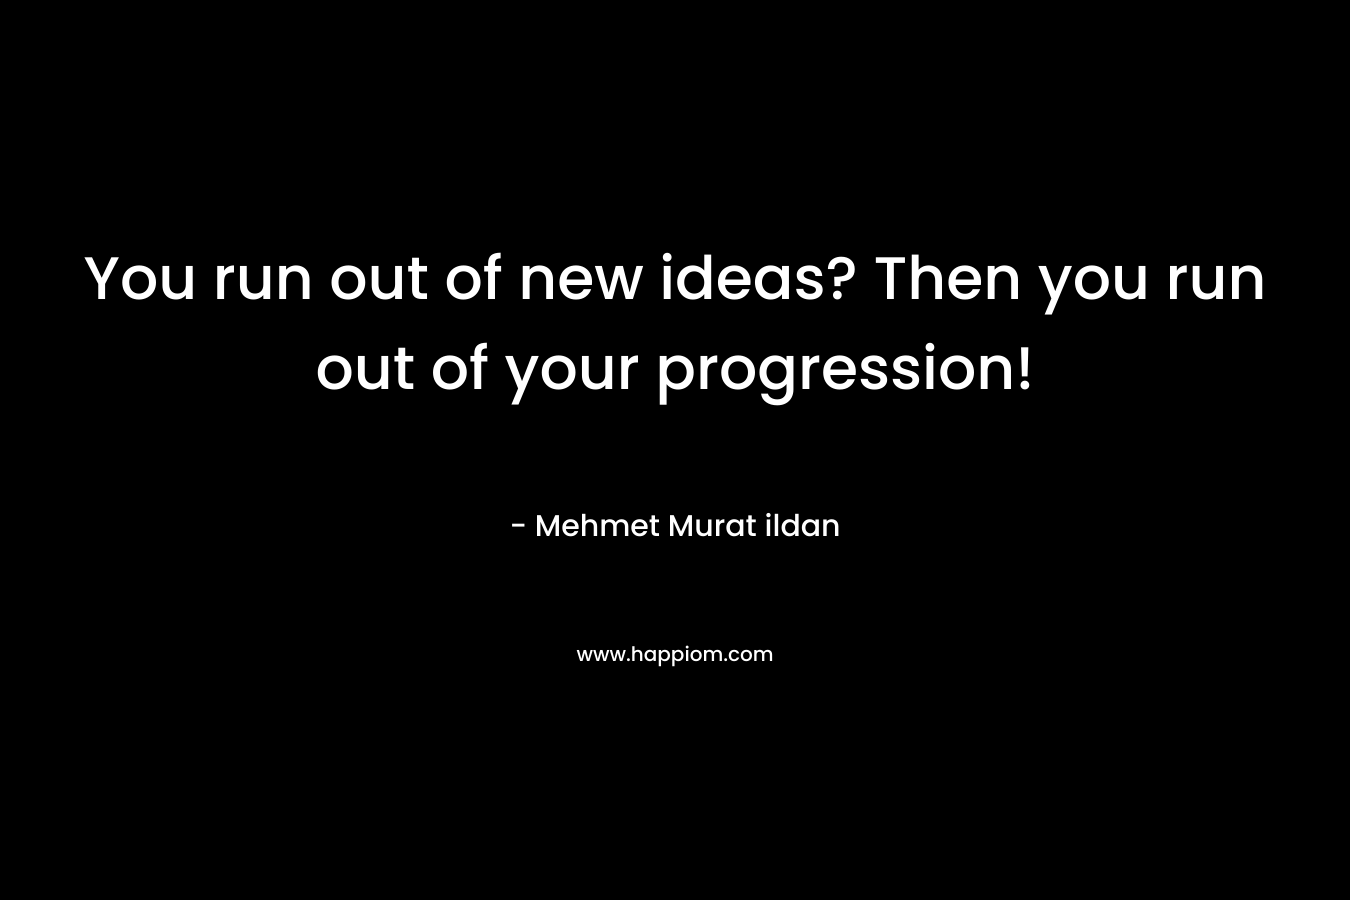 You run out of new ideas? Then you run out of your progression!